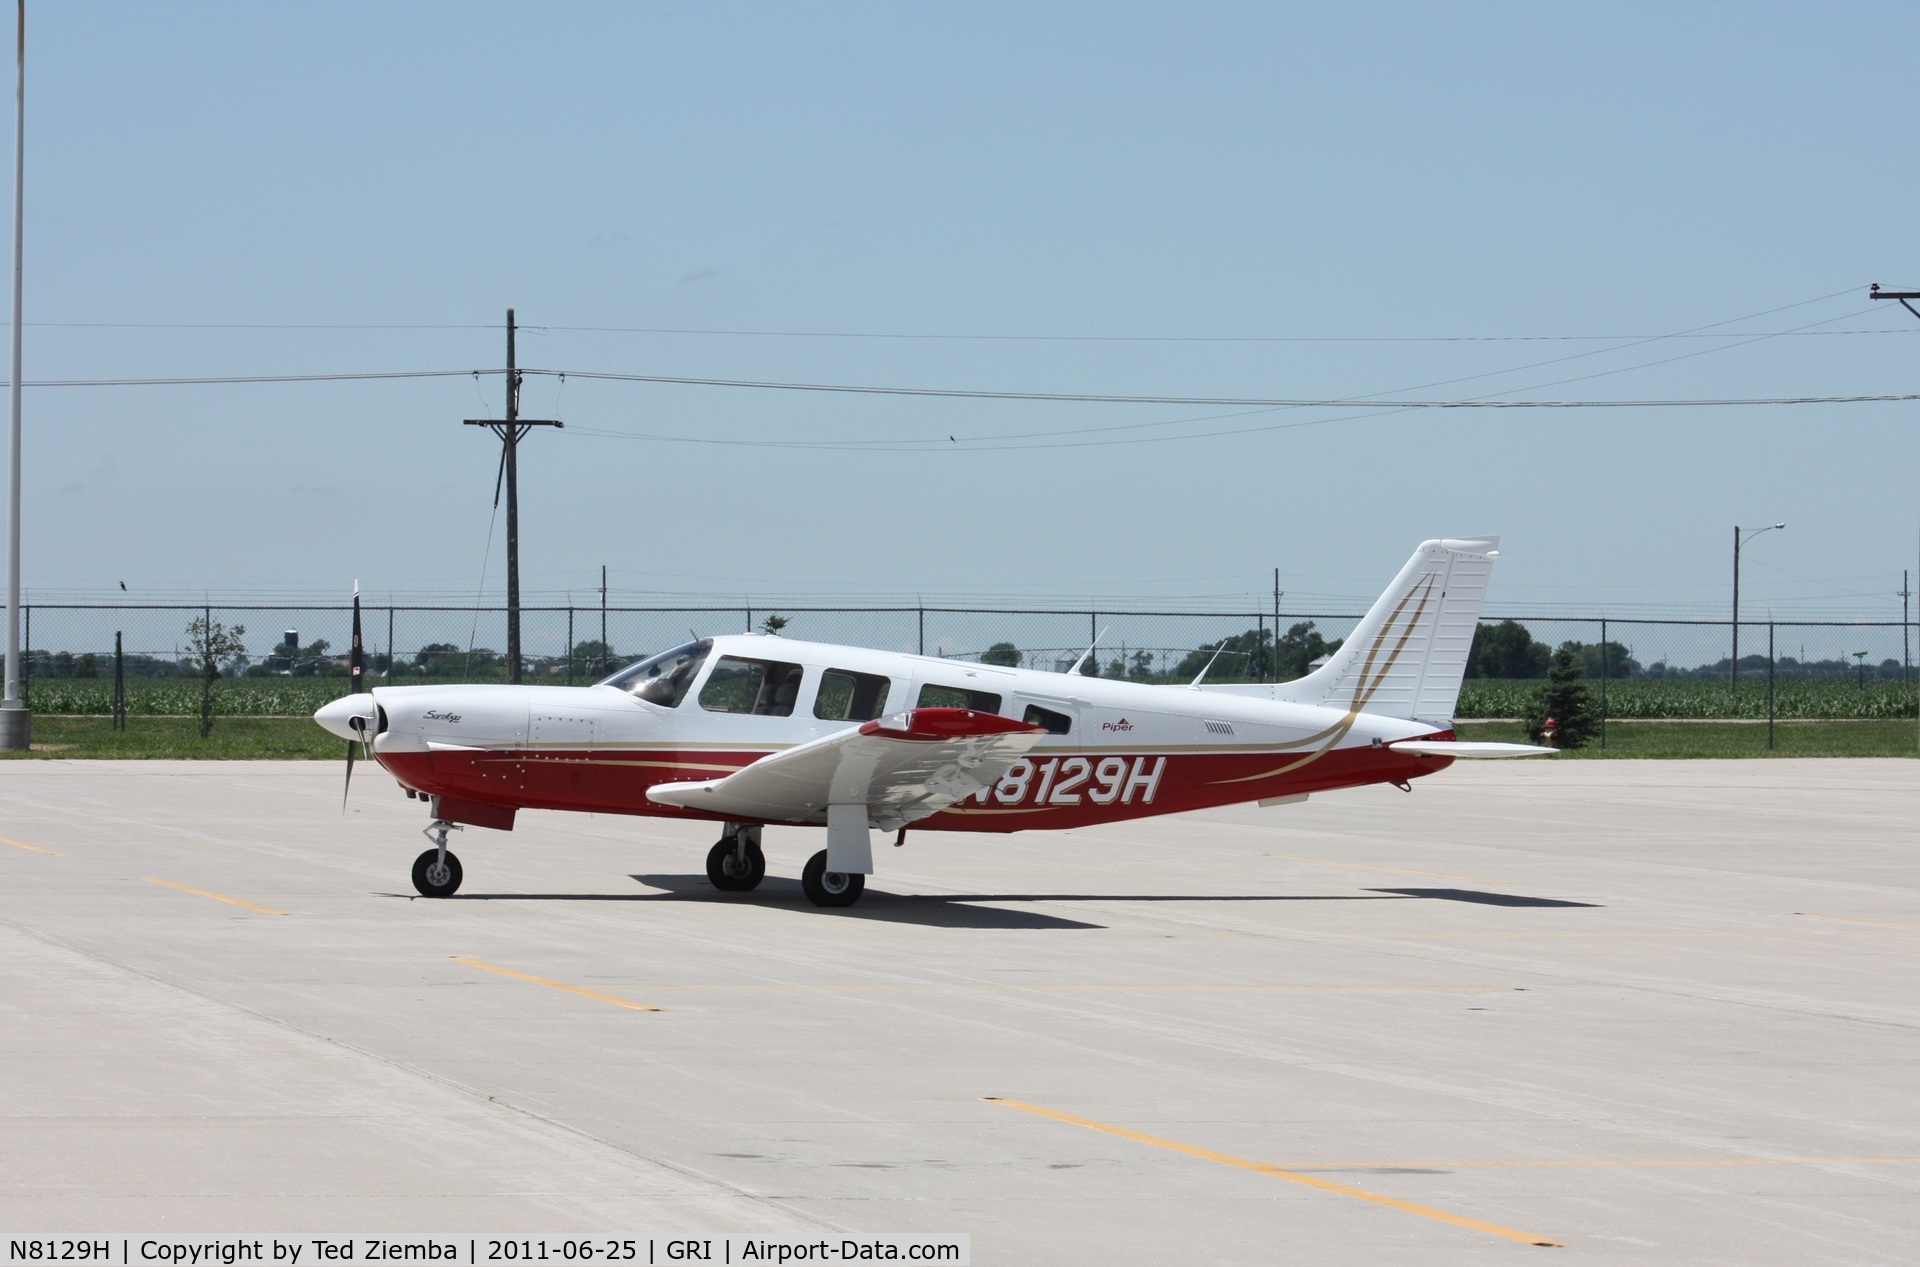 N8129H, 1980 Piper PA-32R-301 Saratoga C/N 32R-8013054, Seen on a hot Saturday afternoon on the ramp at Grand Island.